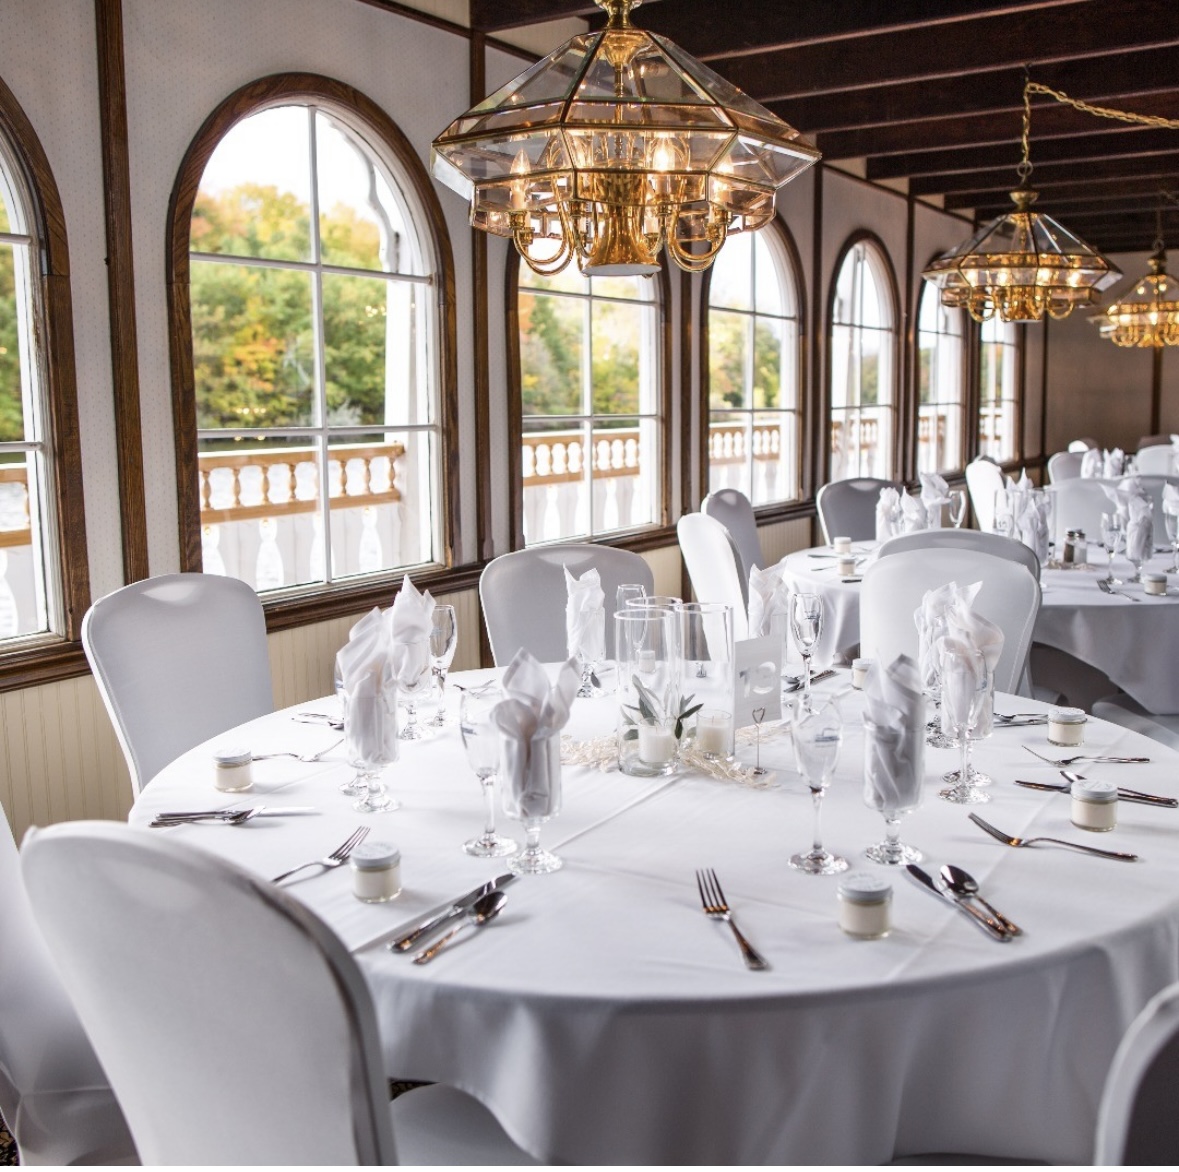 Elegant wedding reception on a boat, with stunning views of the water and a romantic atmosphere